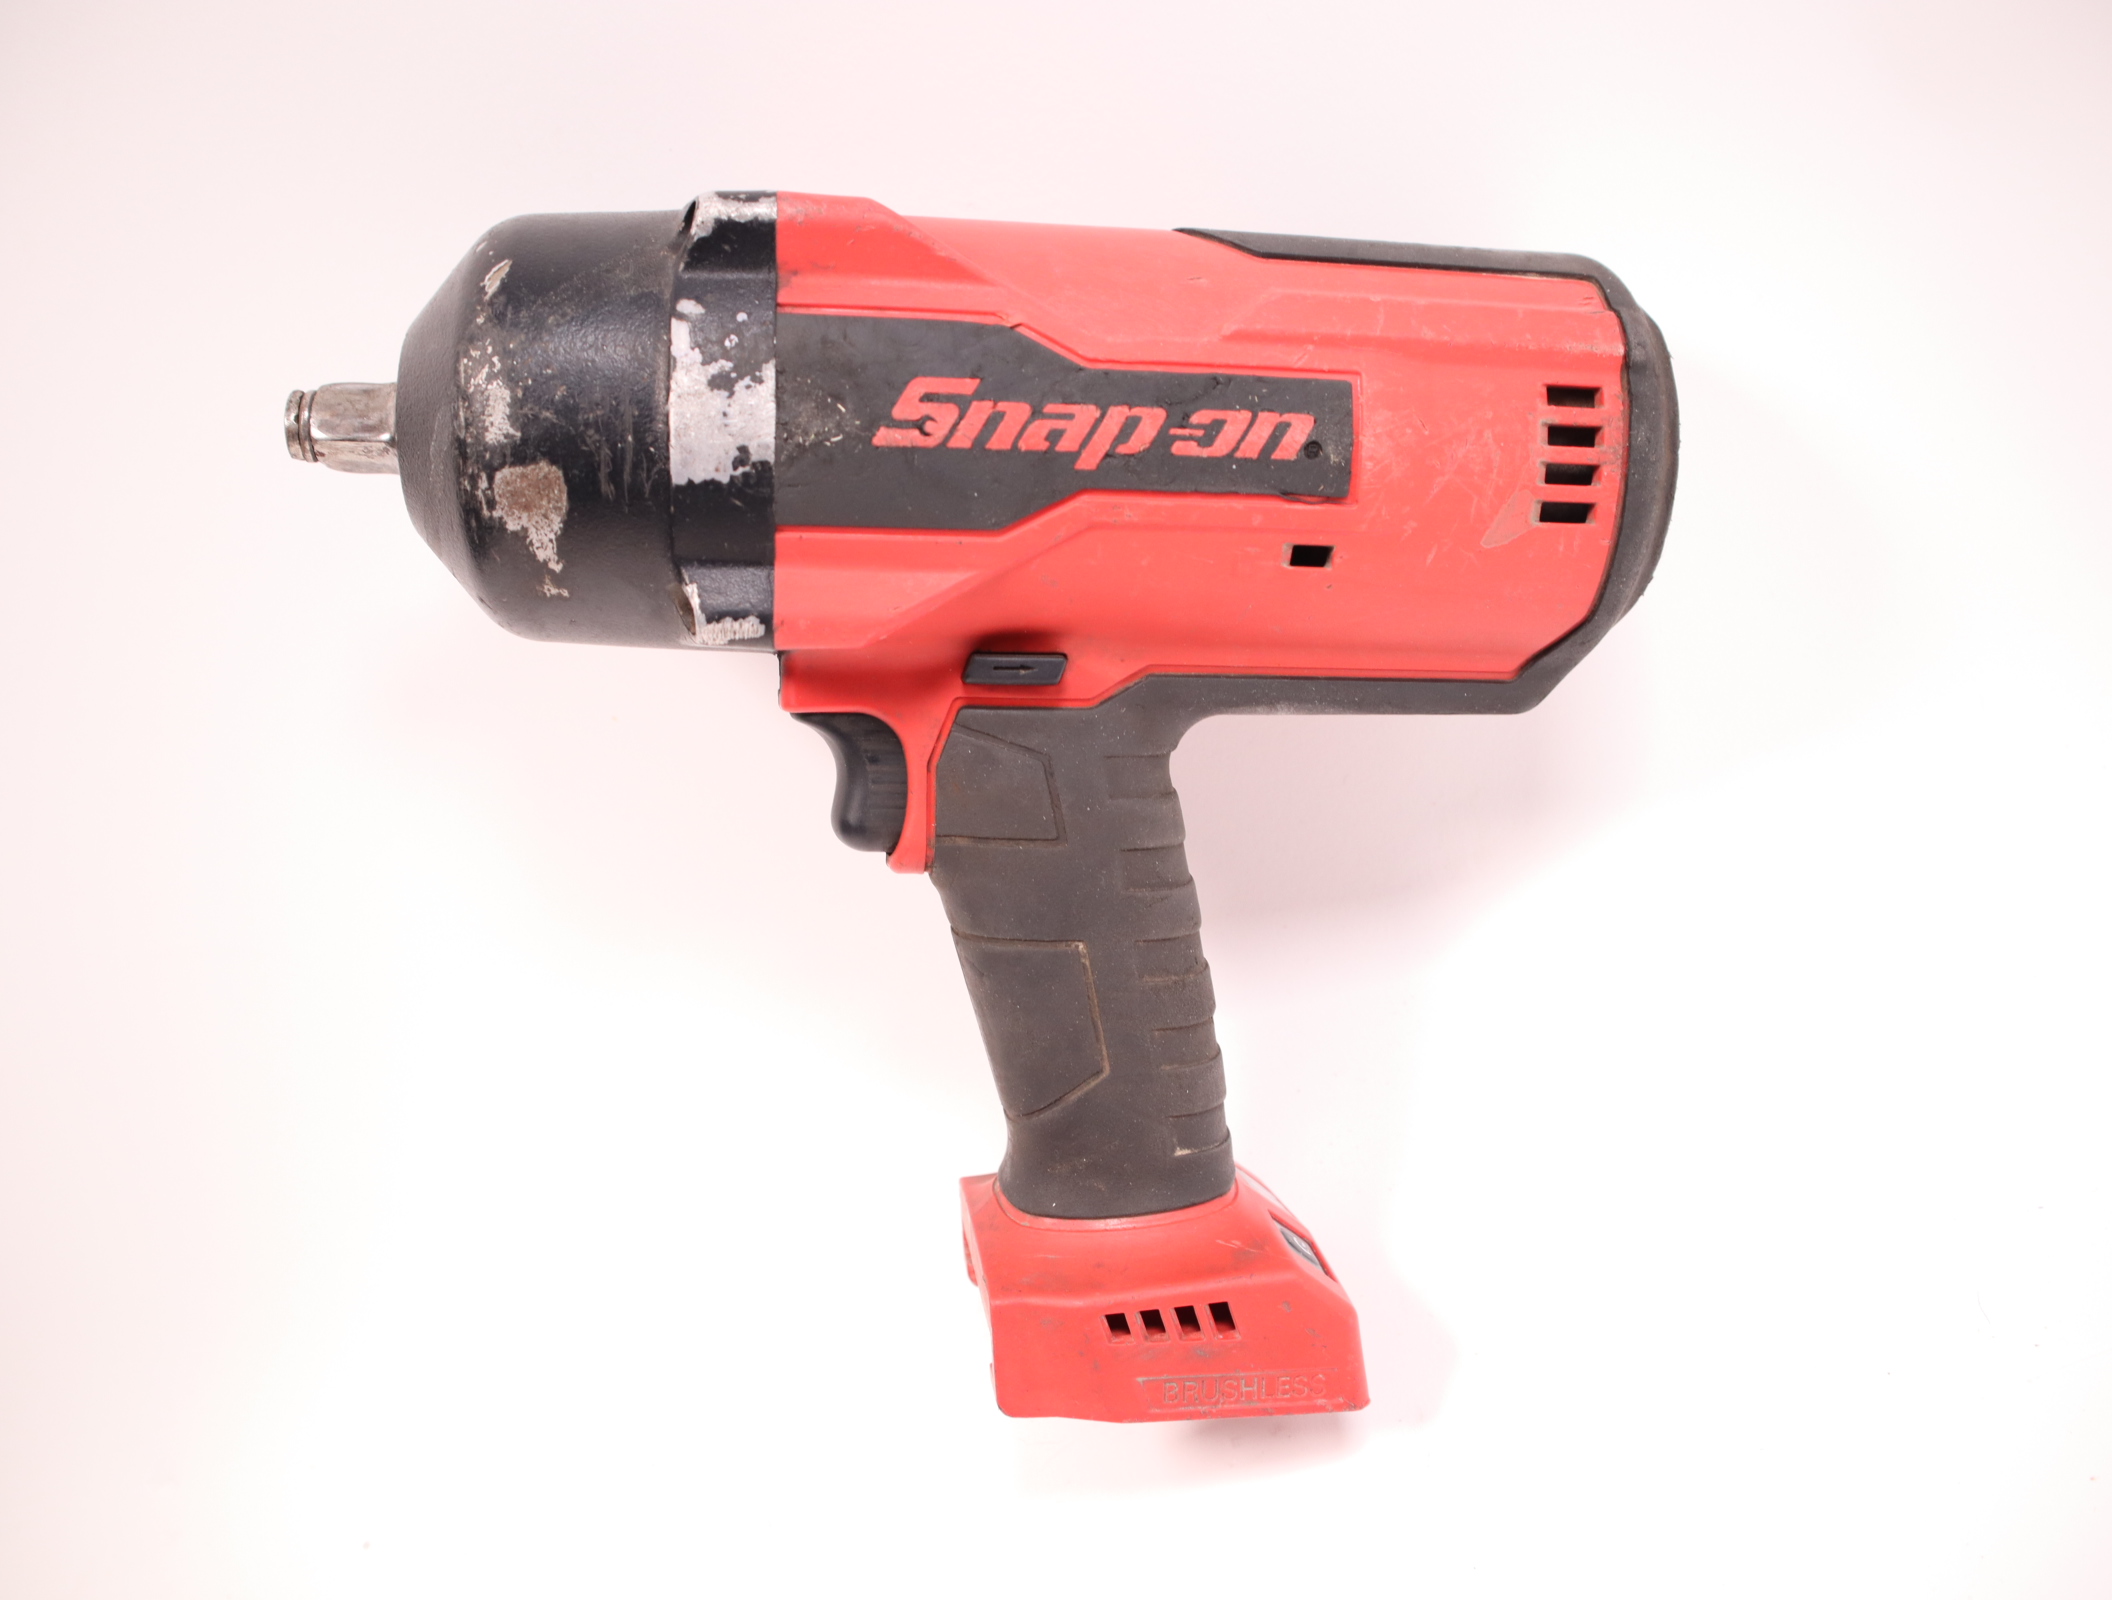 14.4 V 1/4 Drive MicroLithium Cordless Impact Wrench (Tool Only) (Red)